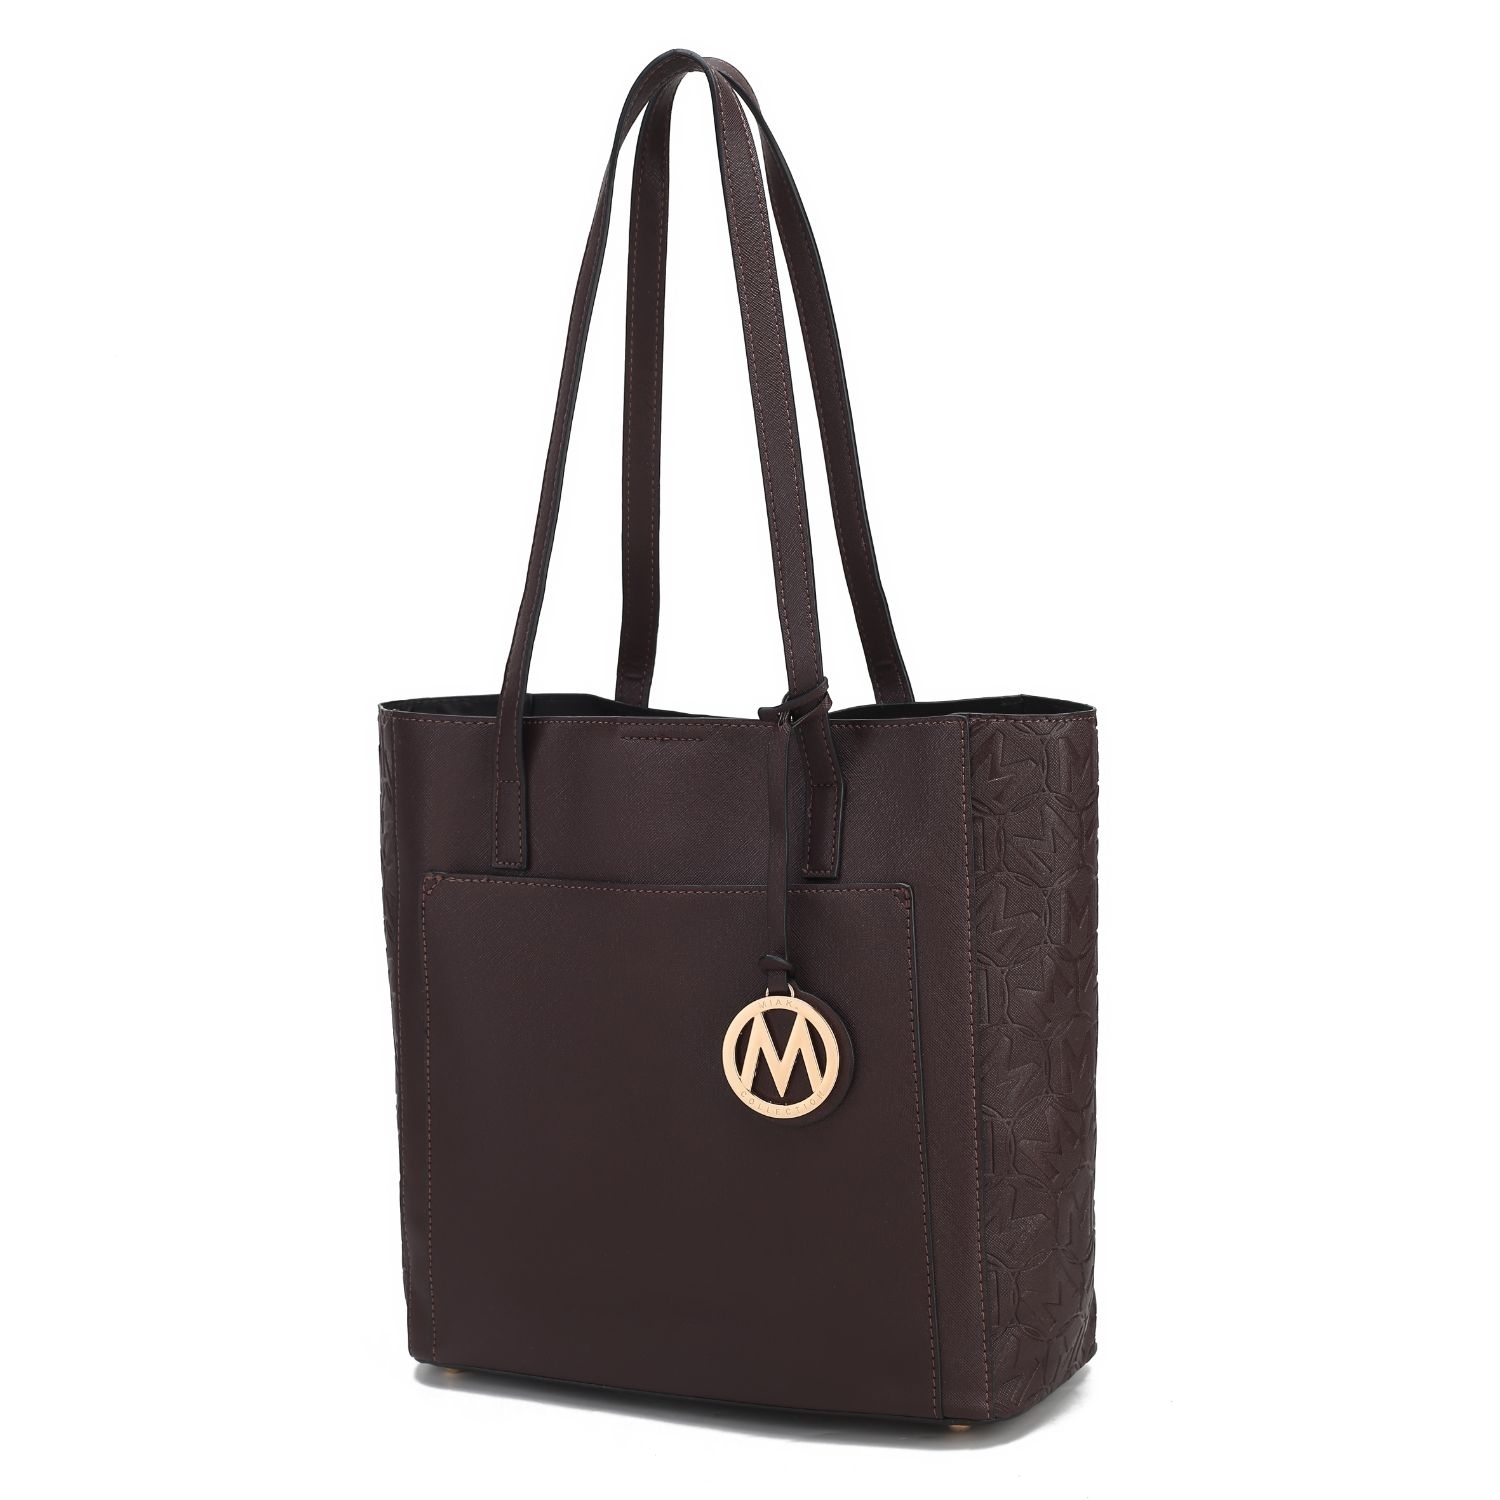 MKF Collection Lea Vegan Leather Women’s Tote Bag By Mia K. - Coffee